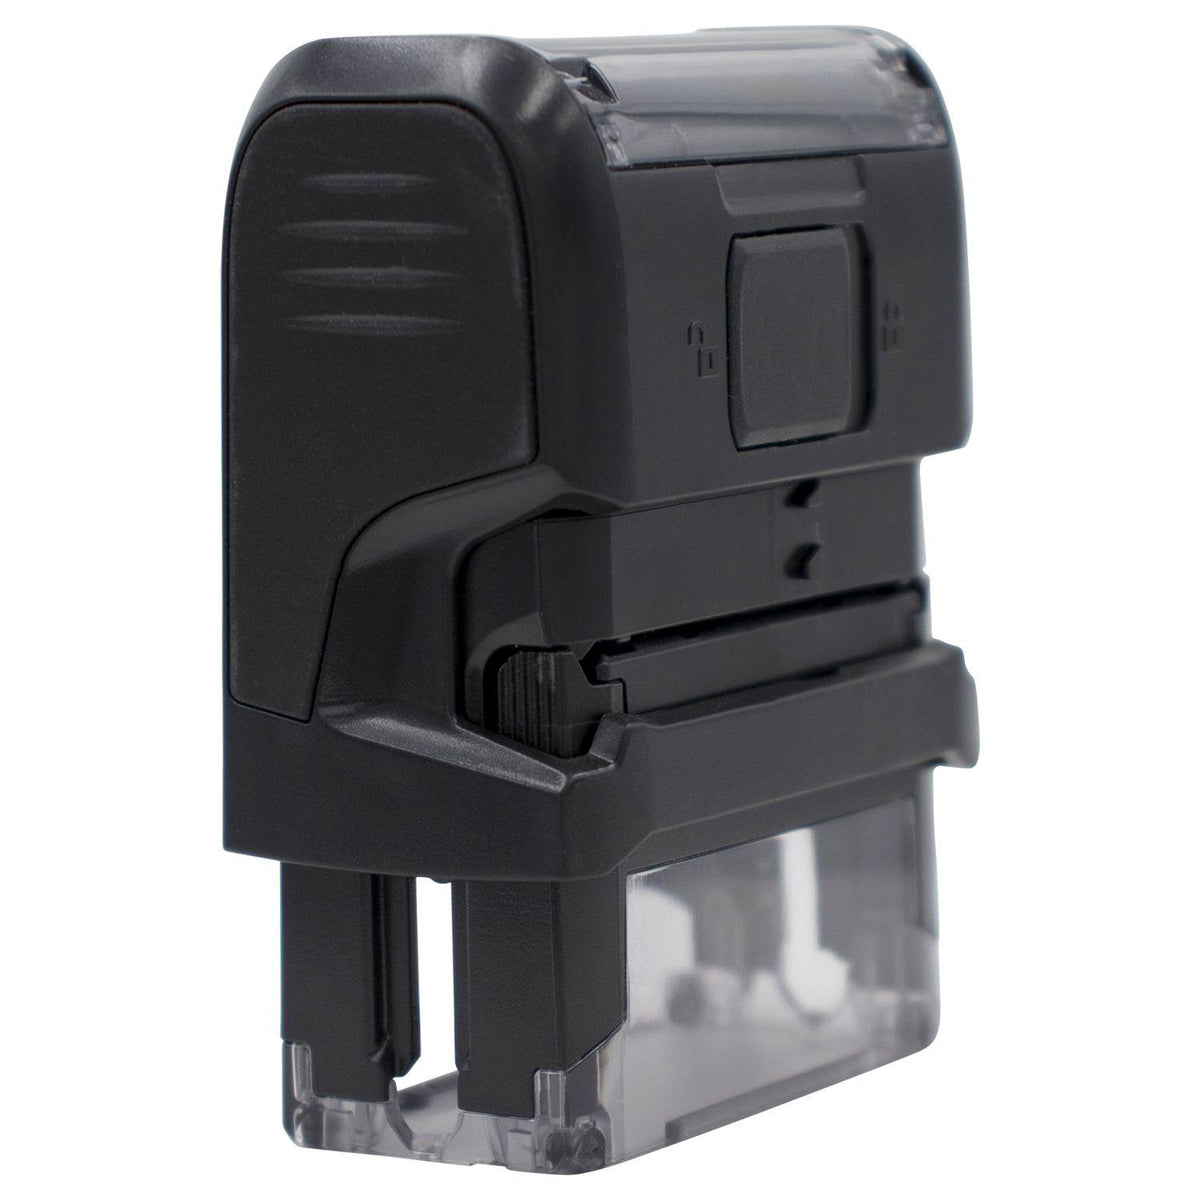 Self-Inking Completed with Checkbox Stamp - Engineer Seal Stamps - Brand_Trodat, Impression Size_Small, Stamp Type_Self-Inking Stamp, Type of Use_Legal, Type of Use_Office, Type of Use_Professional